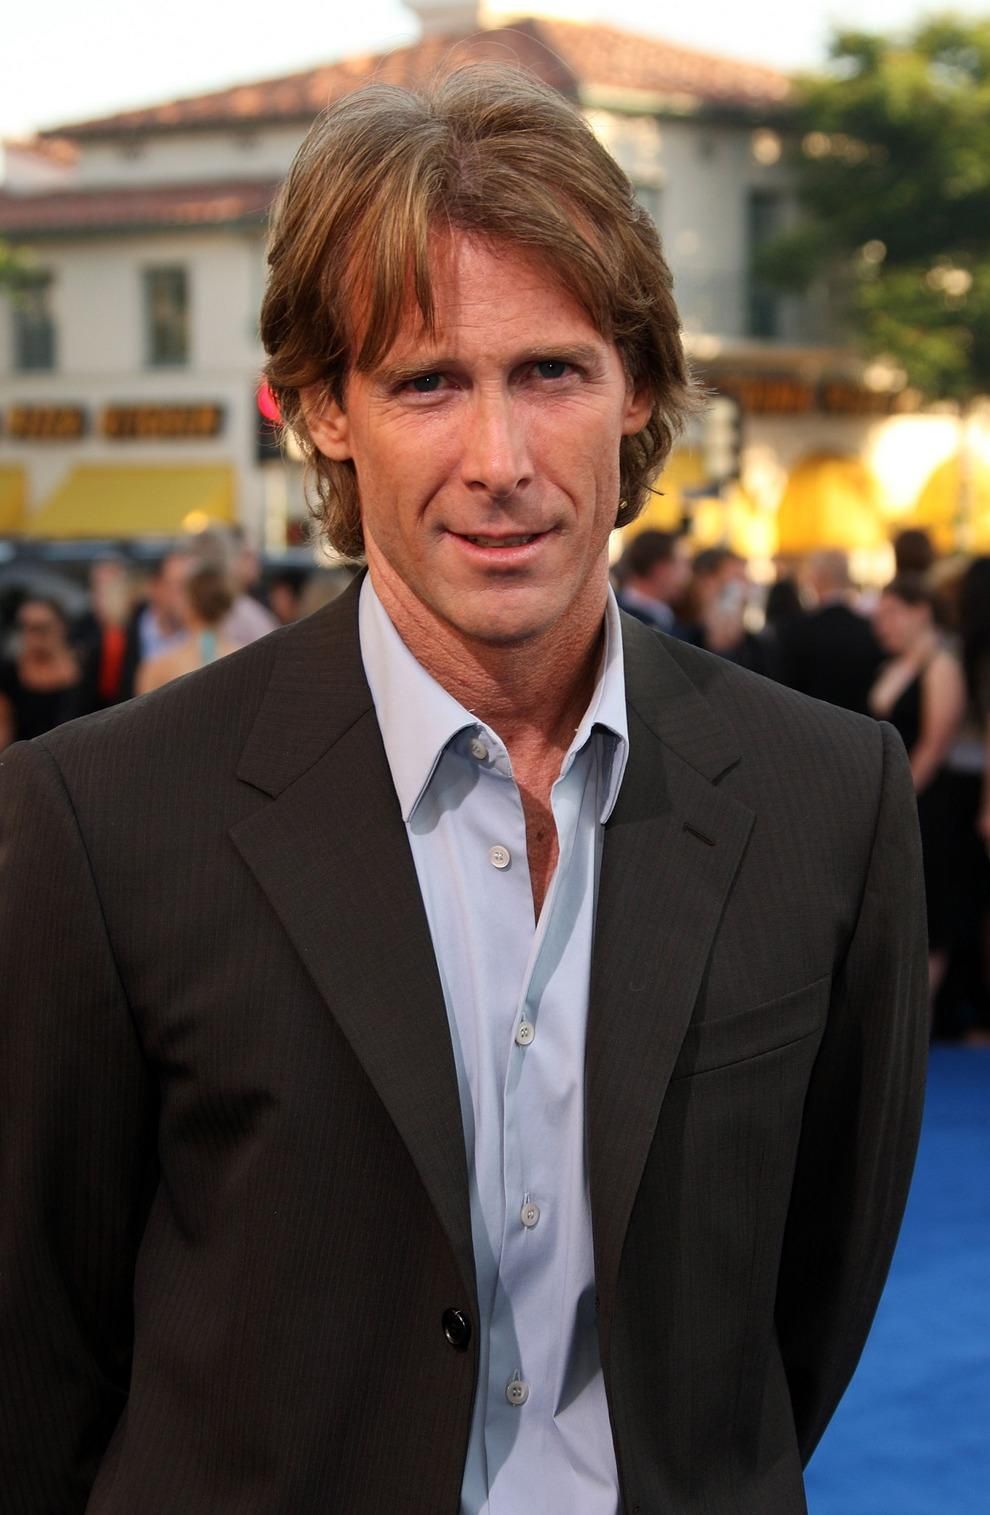 Michael Bay looks forward to Transformers trilogy in days ahead